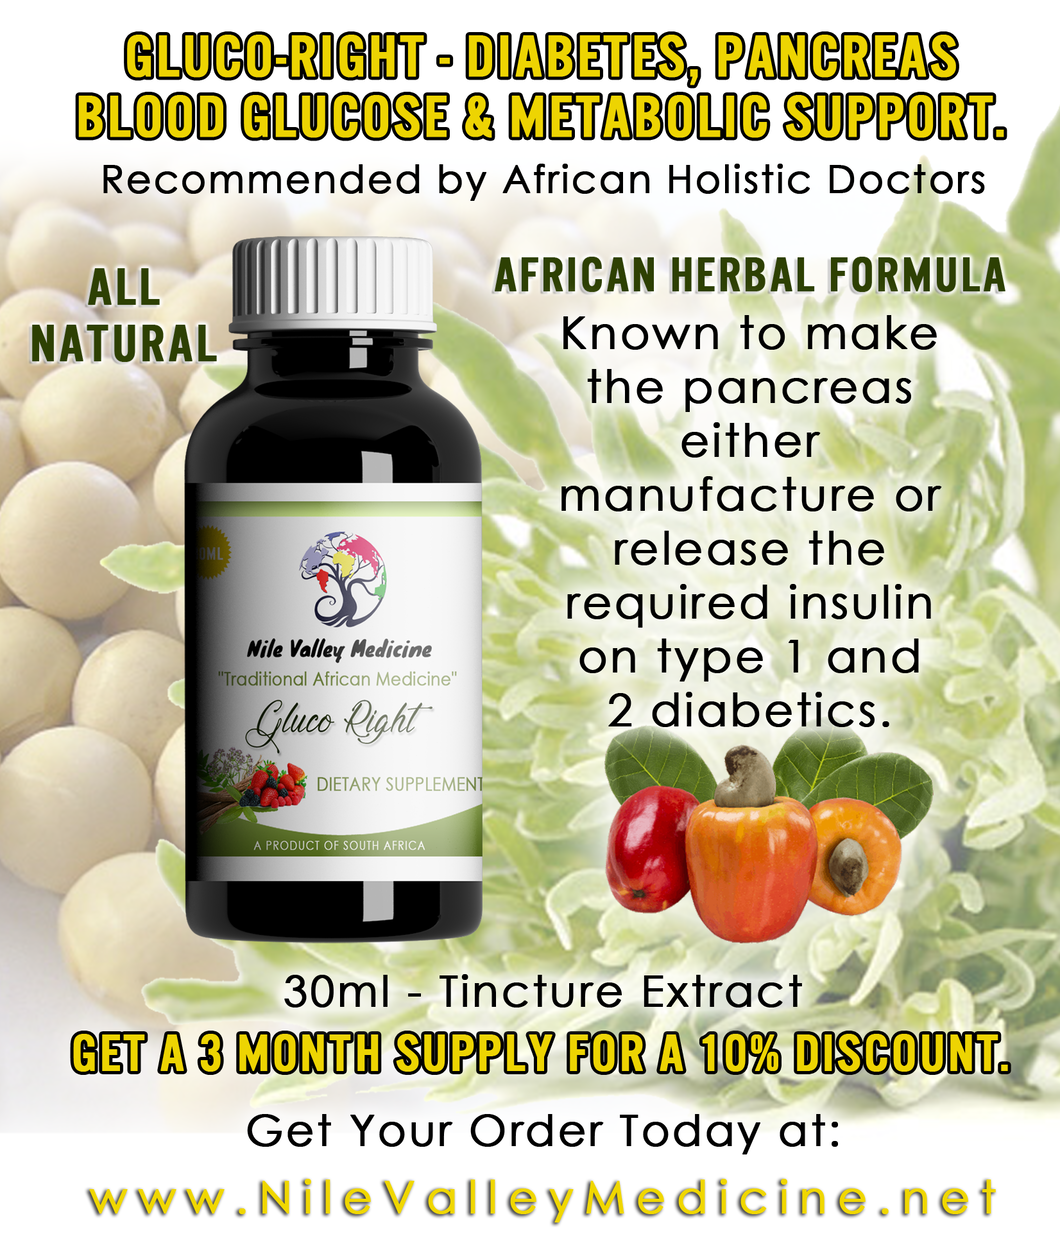 3-MONTH SUPPLY 10% Discount of Gluco-Right: Traditional African Herbal Formula Diabetes, Blood Glucose,  and Metabolic Support, 30ml extract, 3 bottle supply